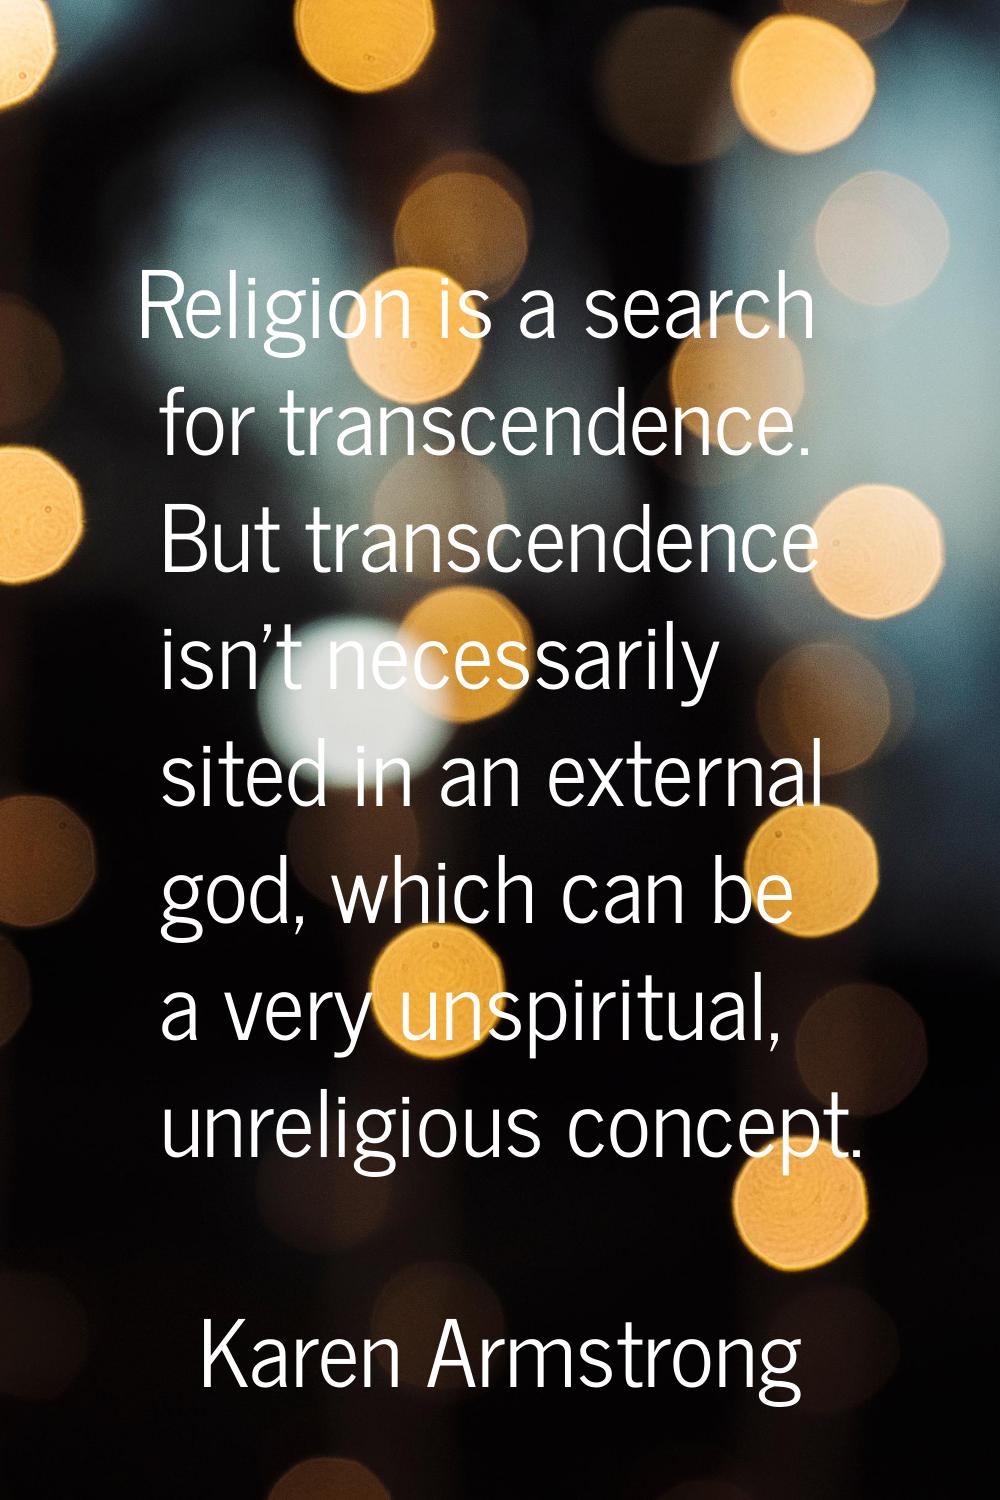 Religion is a search for transcendence. But transcendence isn't necessarily sited in an external go